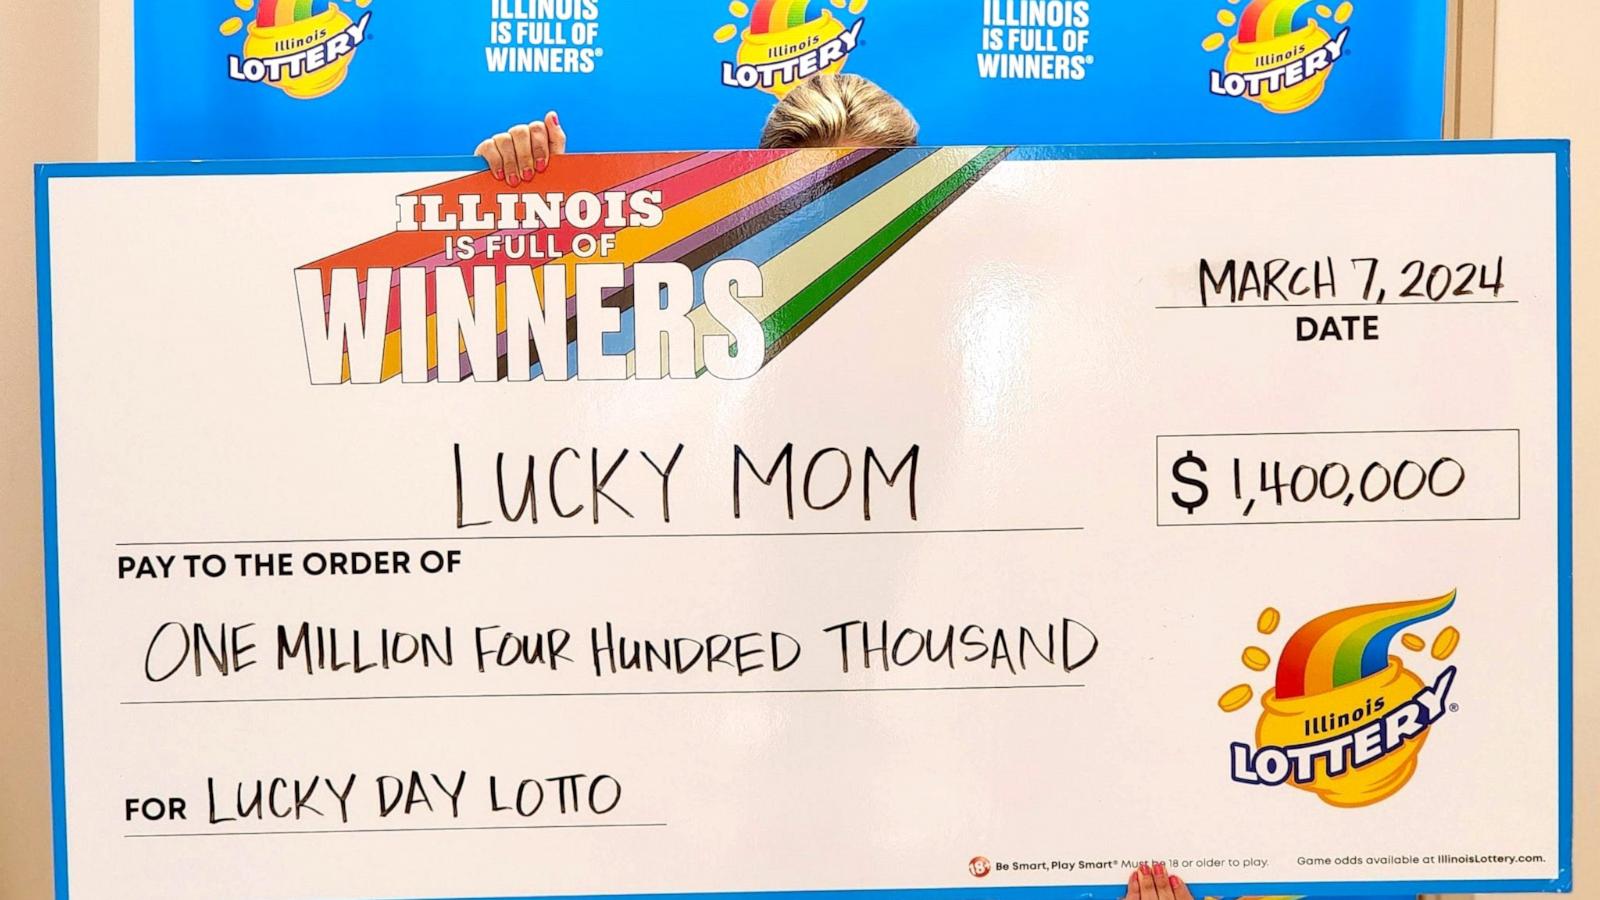 PHOTO: A mother won $1.4 million from the Illinois lottery using her kids' birthdays as winning numbers